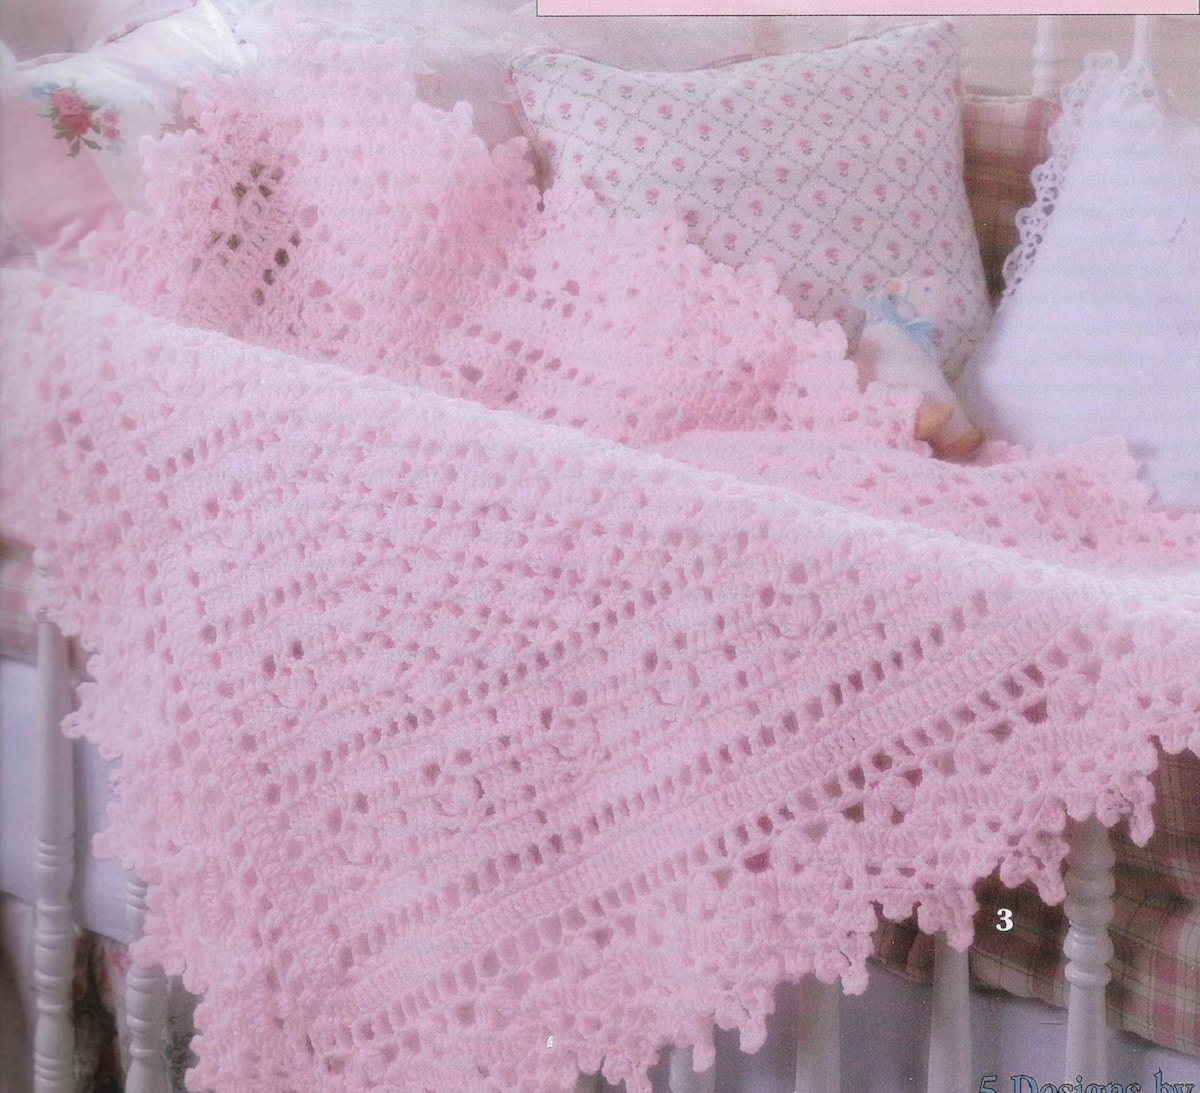 Baby pink crochet blanket with a lace style trim around the side hanging over a cribs railings in a diamond shape.